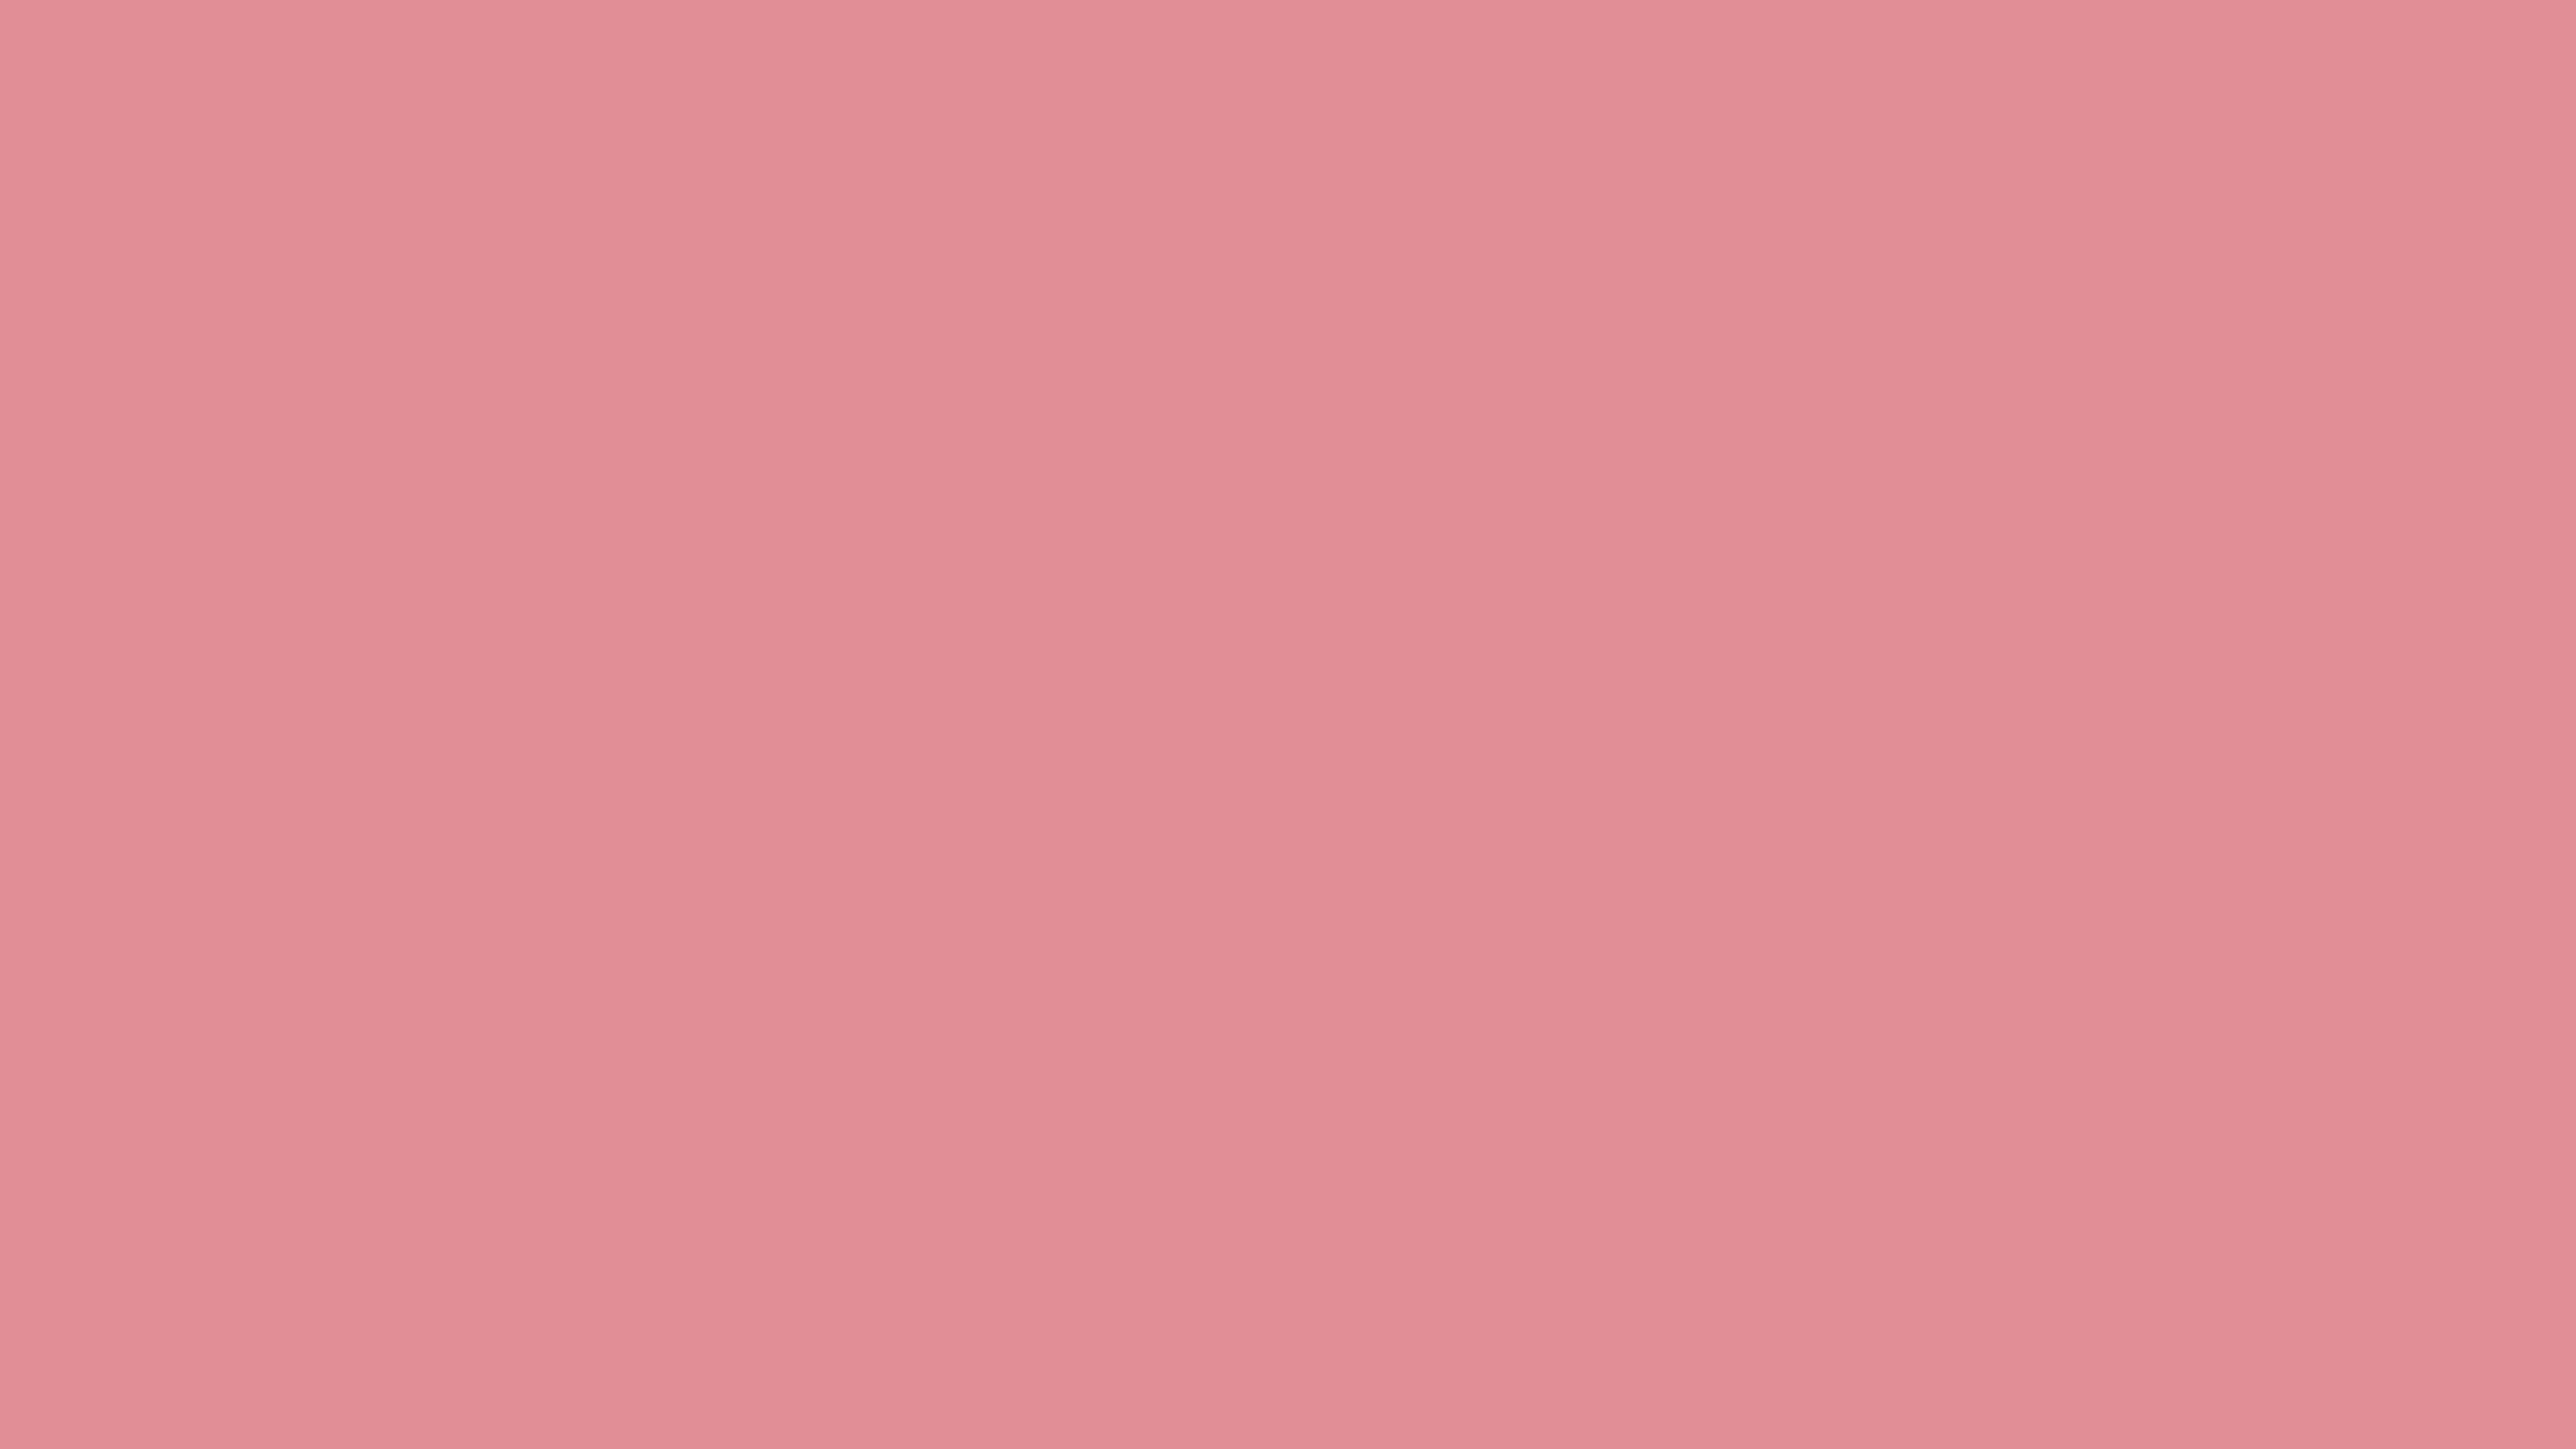 4096x2304 Ruddy Pink Solid Color Background